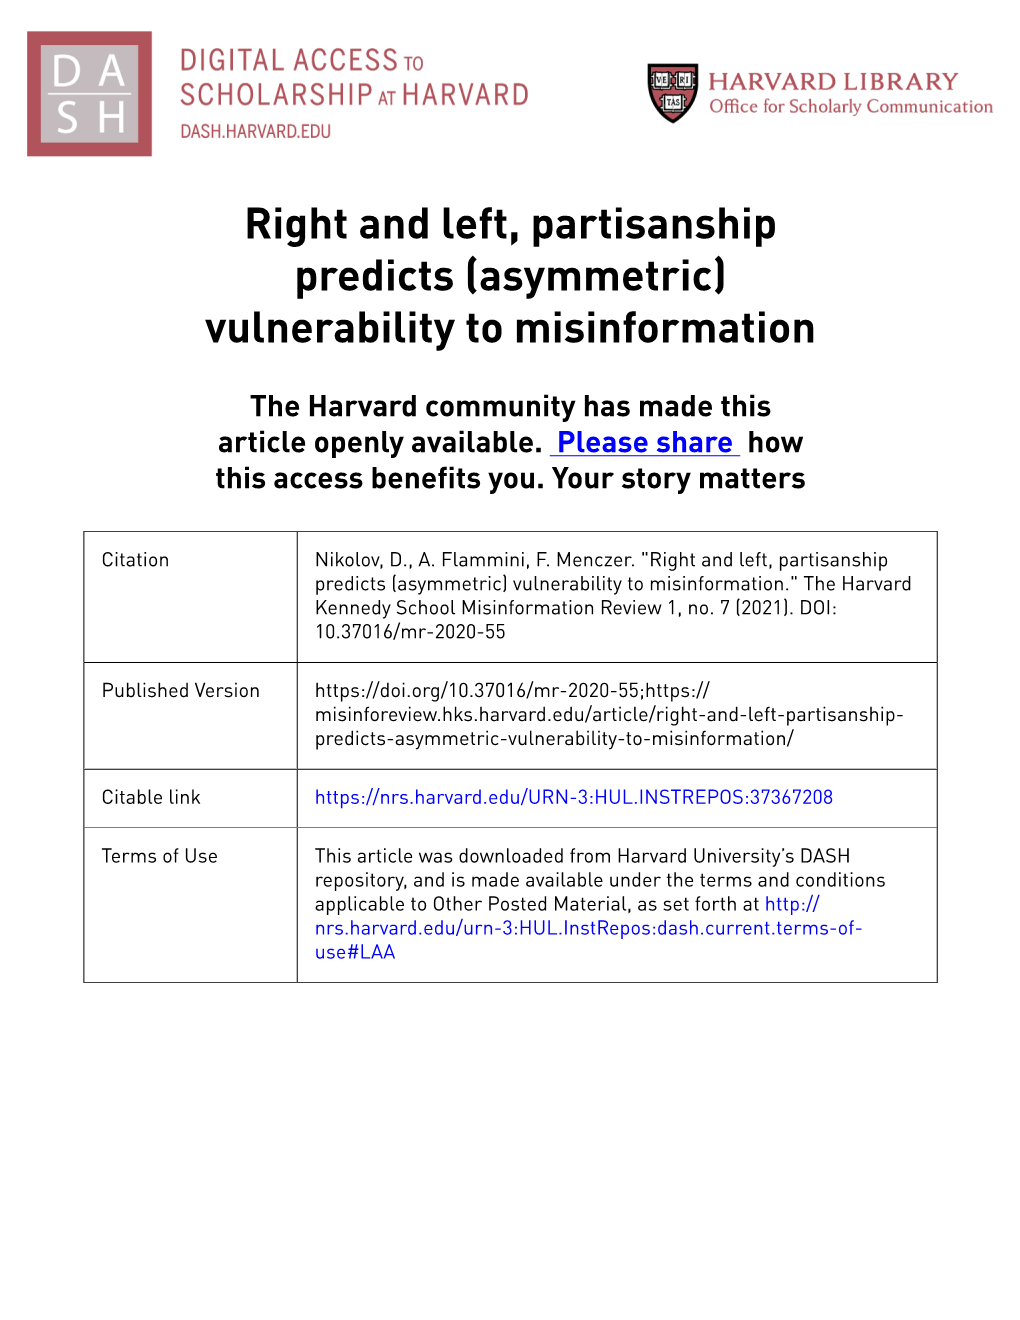 Right and Left, Partisanship Predicts (Asymmetric) Vulnerability to Misinformation